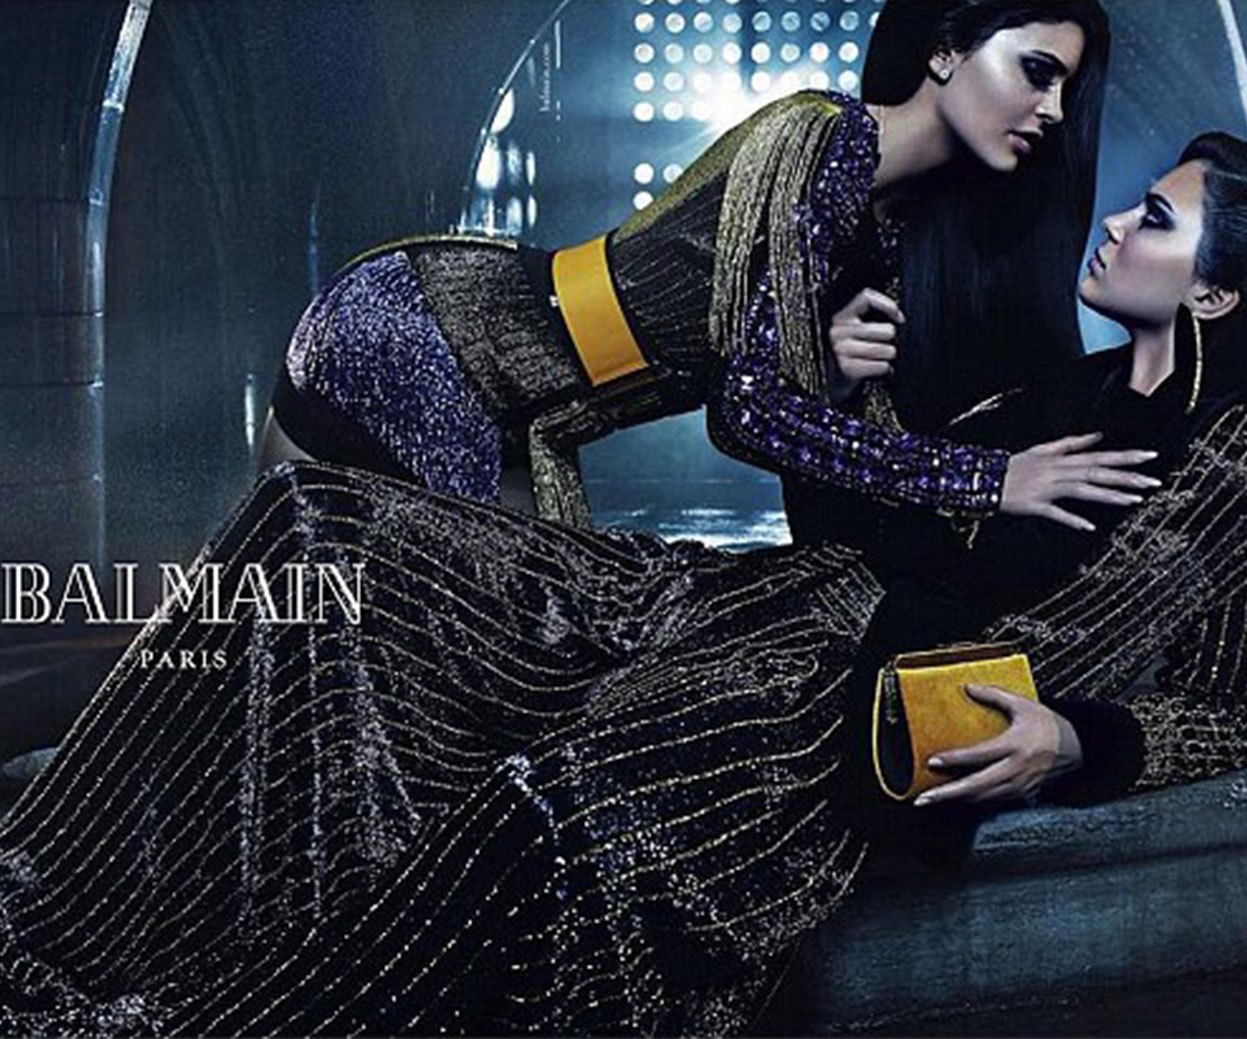 Kendall and Kylie Jenner star in new Balmain ad